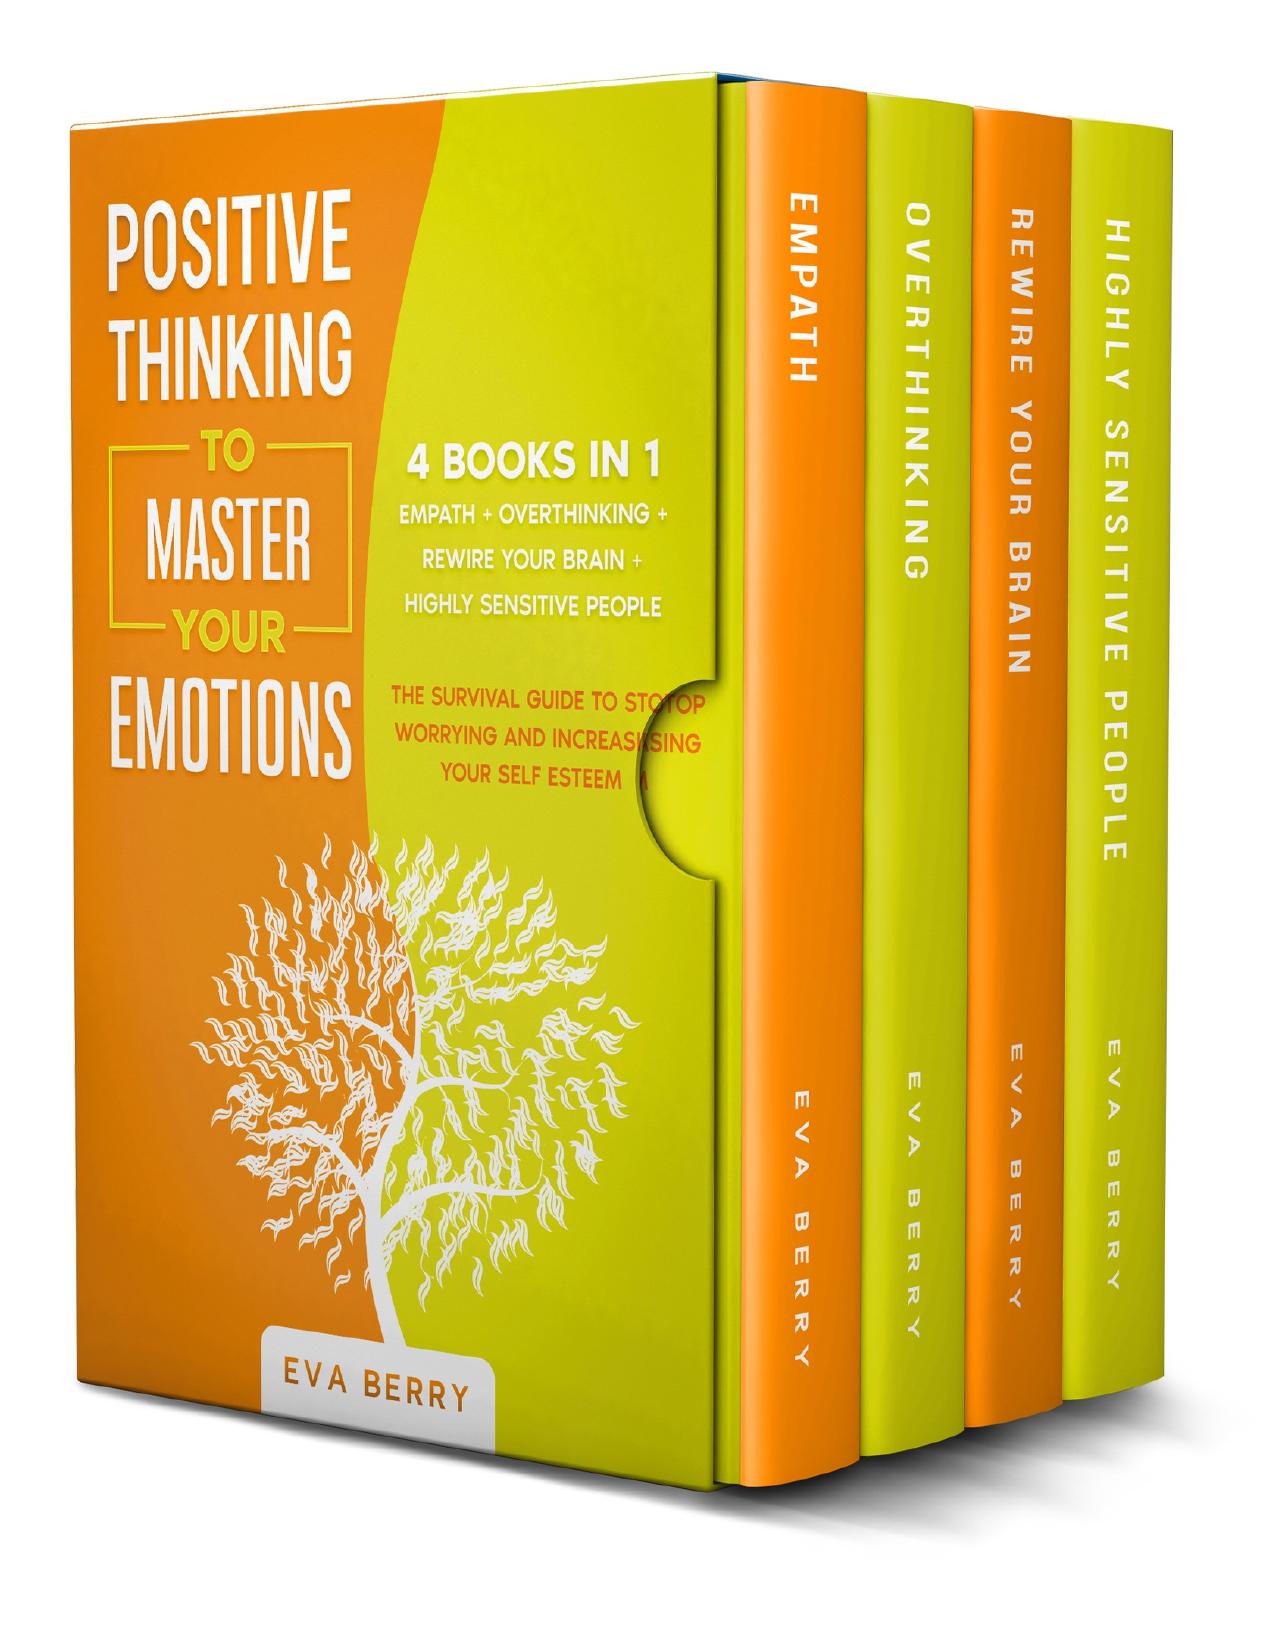 Positive Thinking To Master Your Emotions: This Book Includes: Empath + Overthinking + Rewire Your Brain + Highly Sensitive People; The Survival Guide To Stop Worrying And Increasing Your Self Esteem by Berry Eva